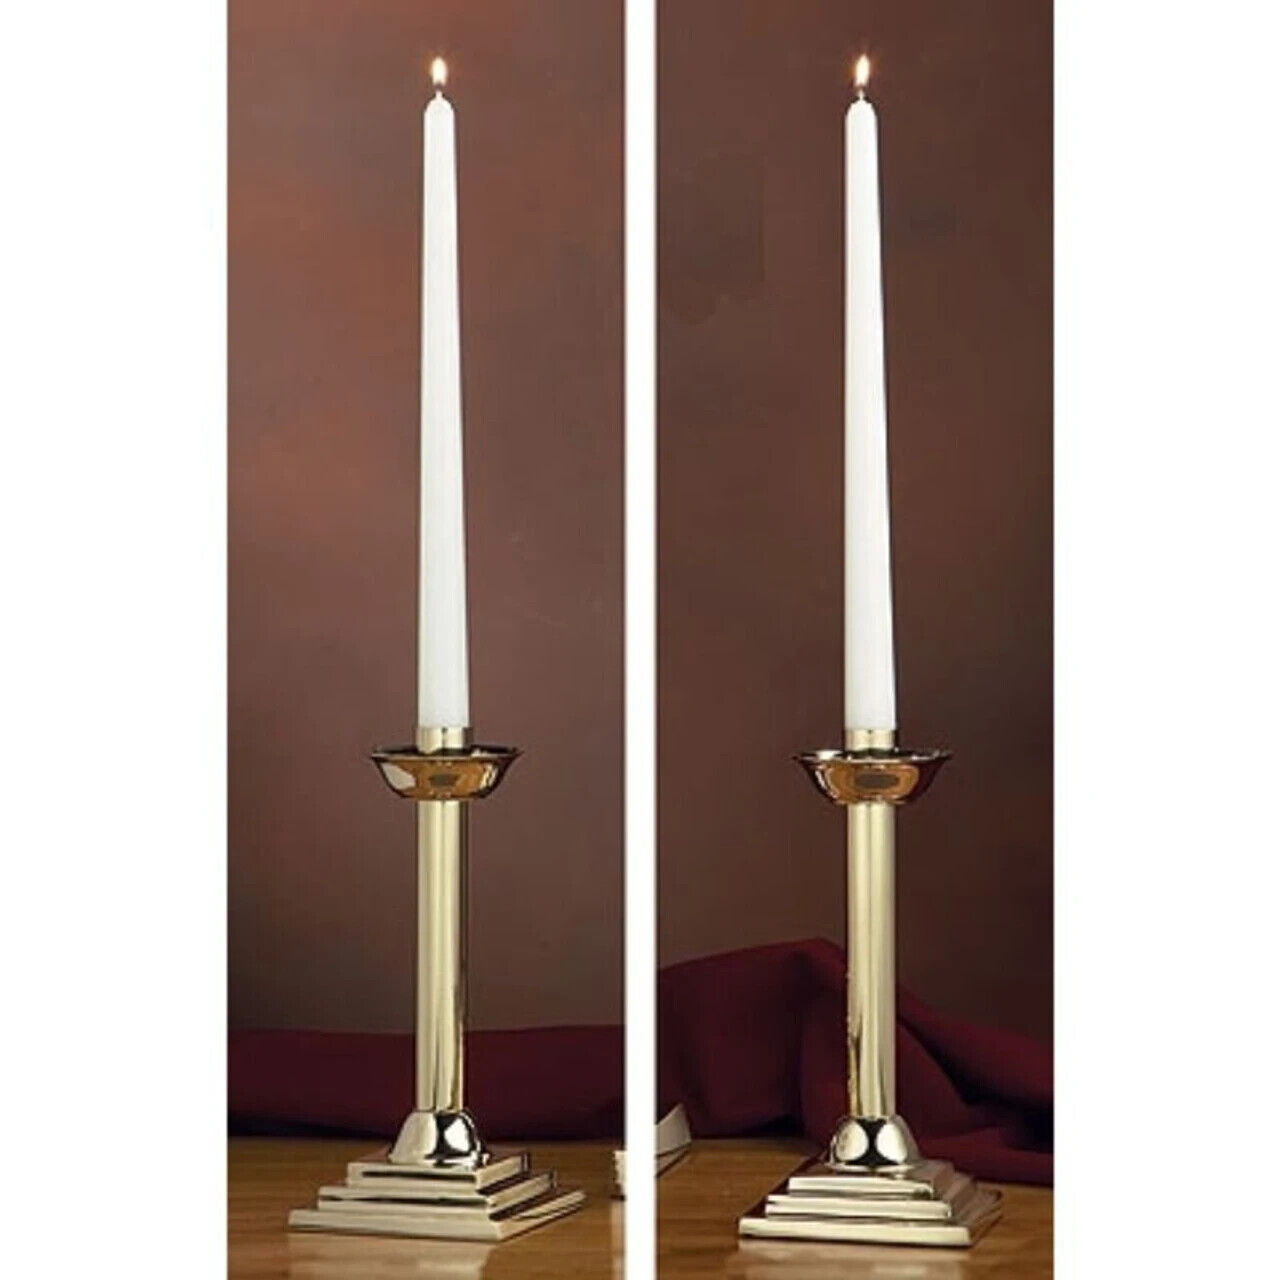 Set of 2 Solid Brass Ornate Altar Candlesticks Church or Sanctuary Use 9 In